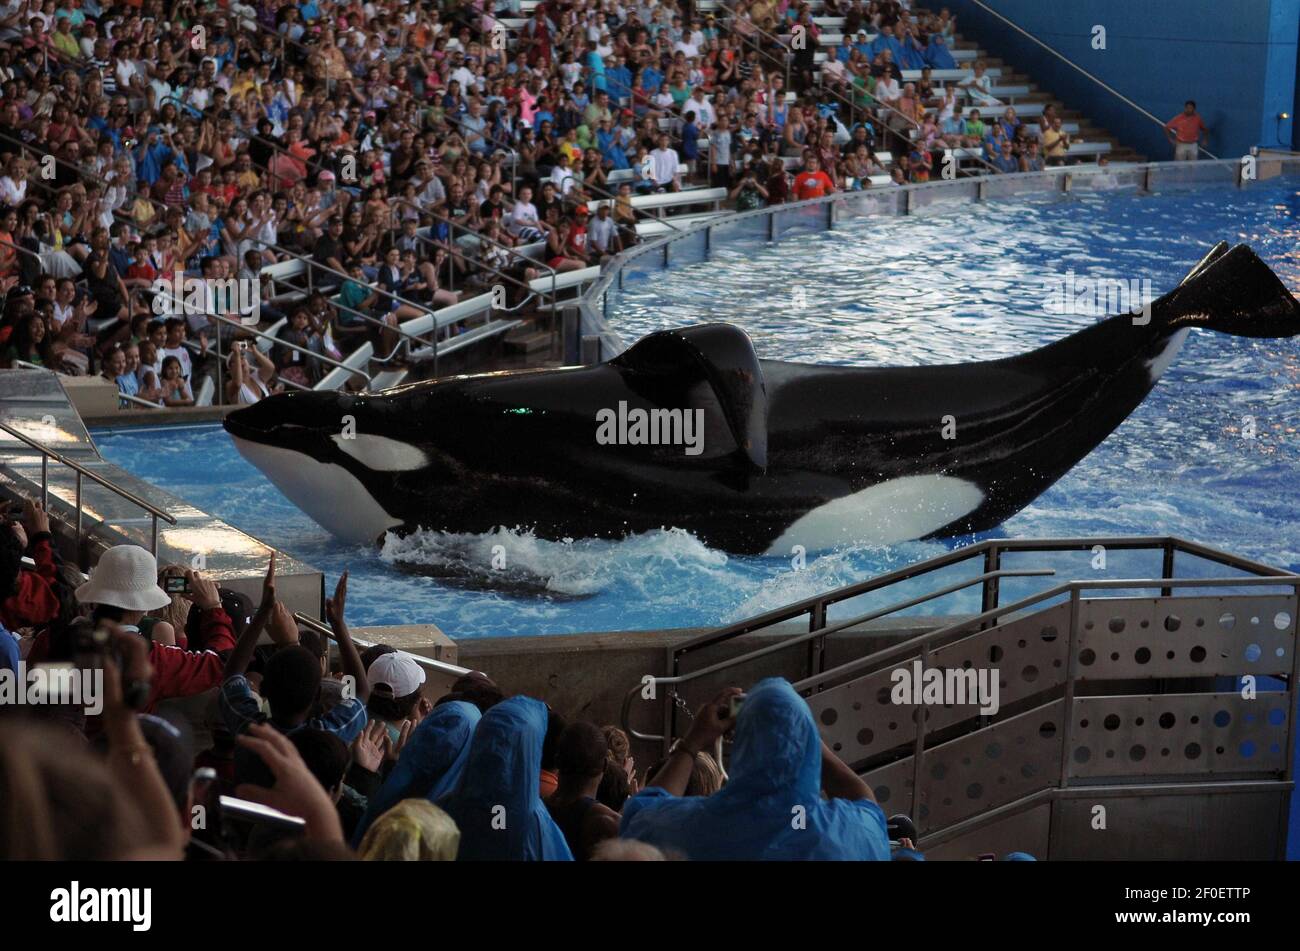 25 February 10 Orlando Florida A 40 Year Old Trainer At Sea World Named Dawn Brancheau Was Killed By An Orca Named Tilikum At The End Of The Midday Performance Of